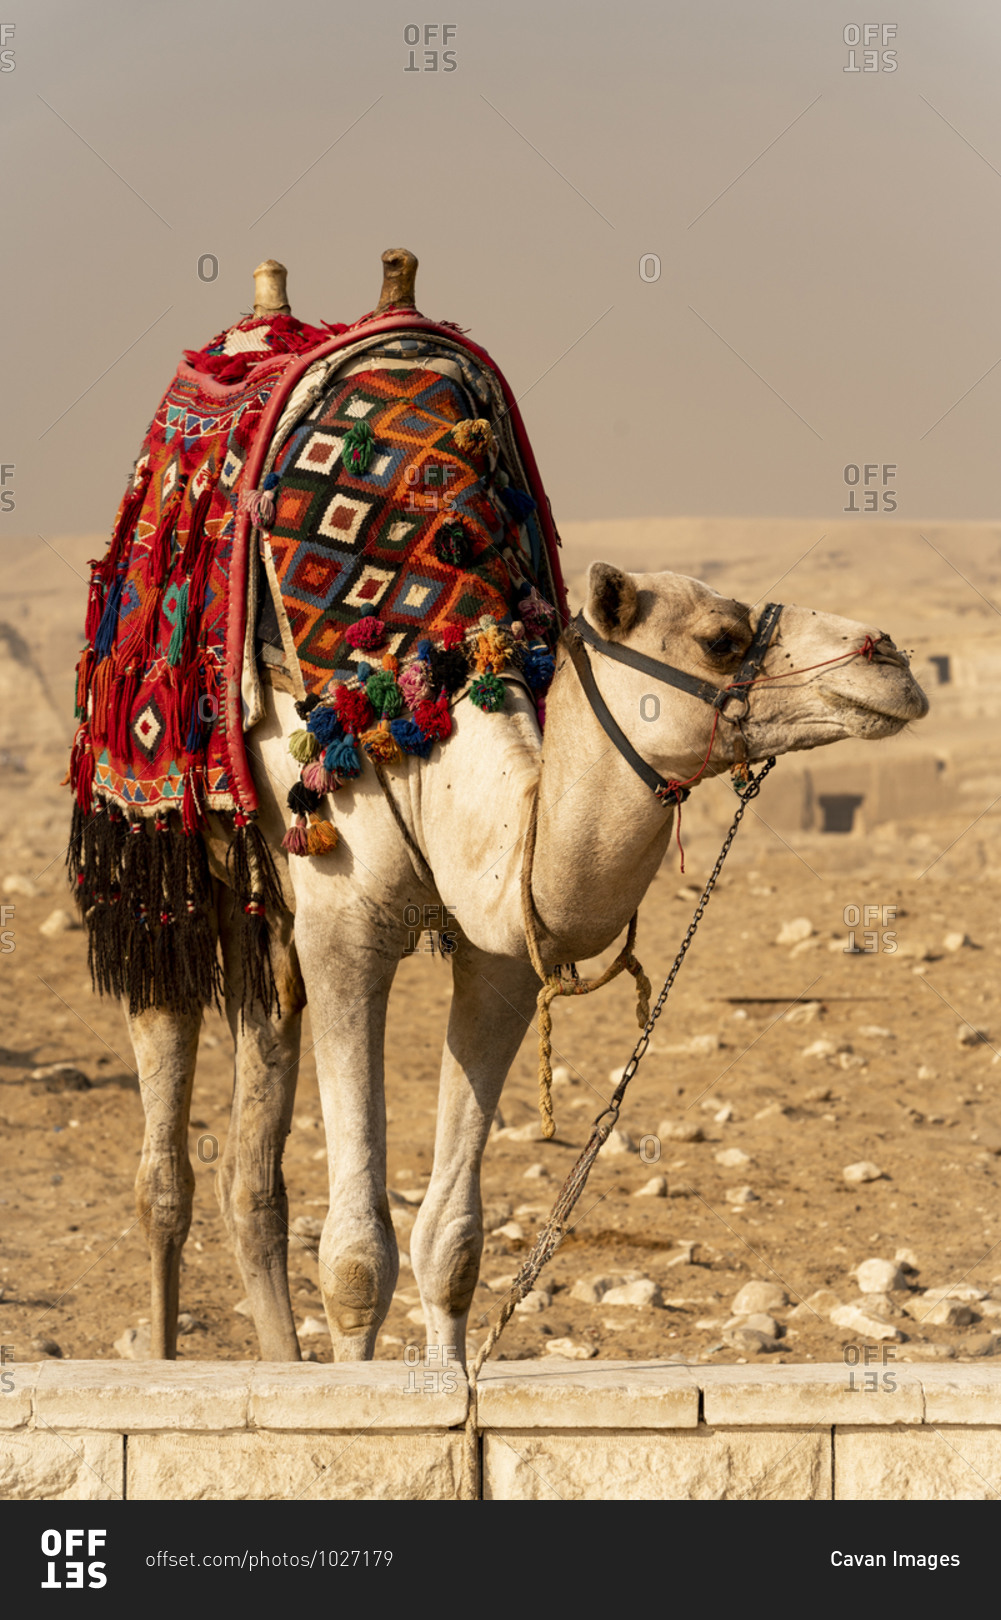 A camel stands dressed and ready for transport in Giza, Egypt